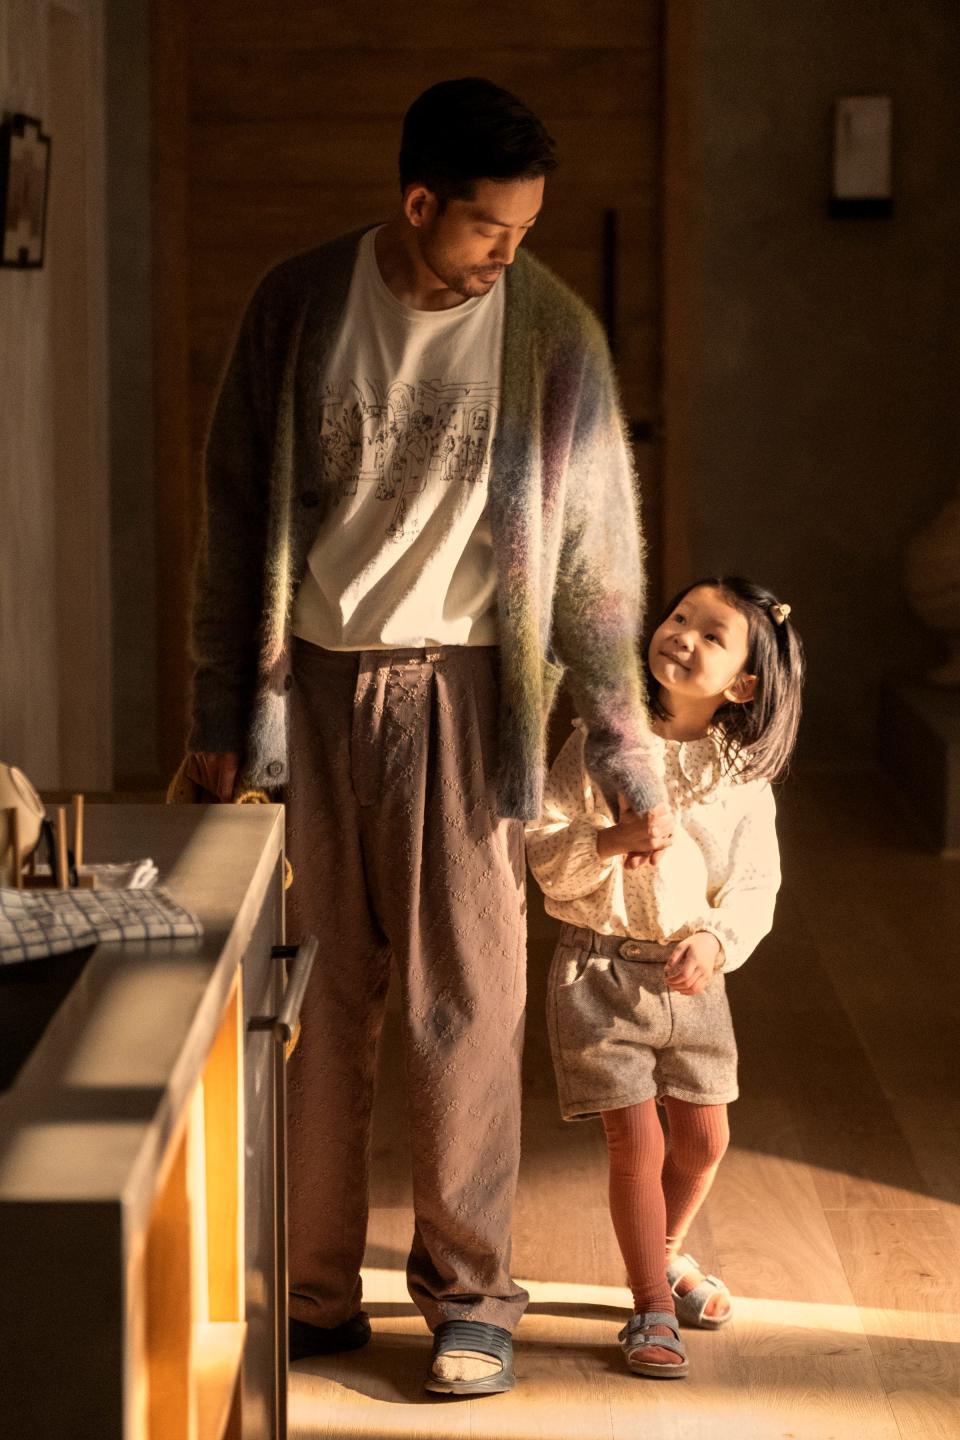 Joseph Lee as Amy's husband George and Remy Holt as her daughter June in "Beef."